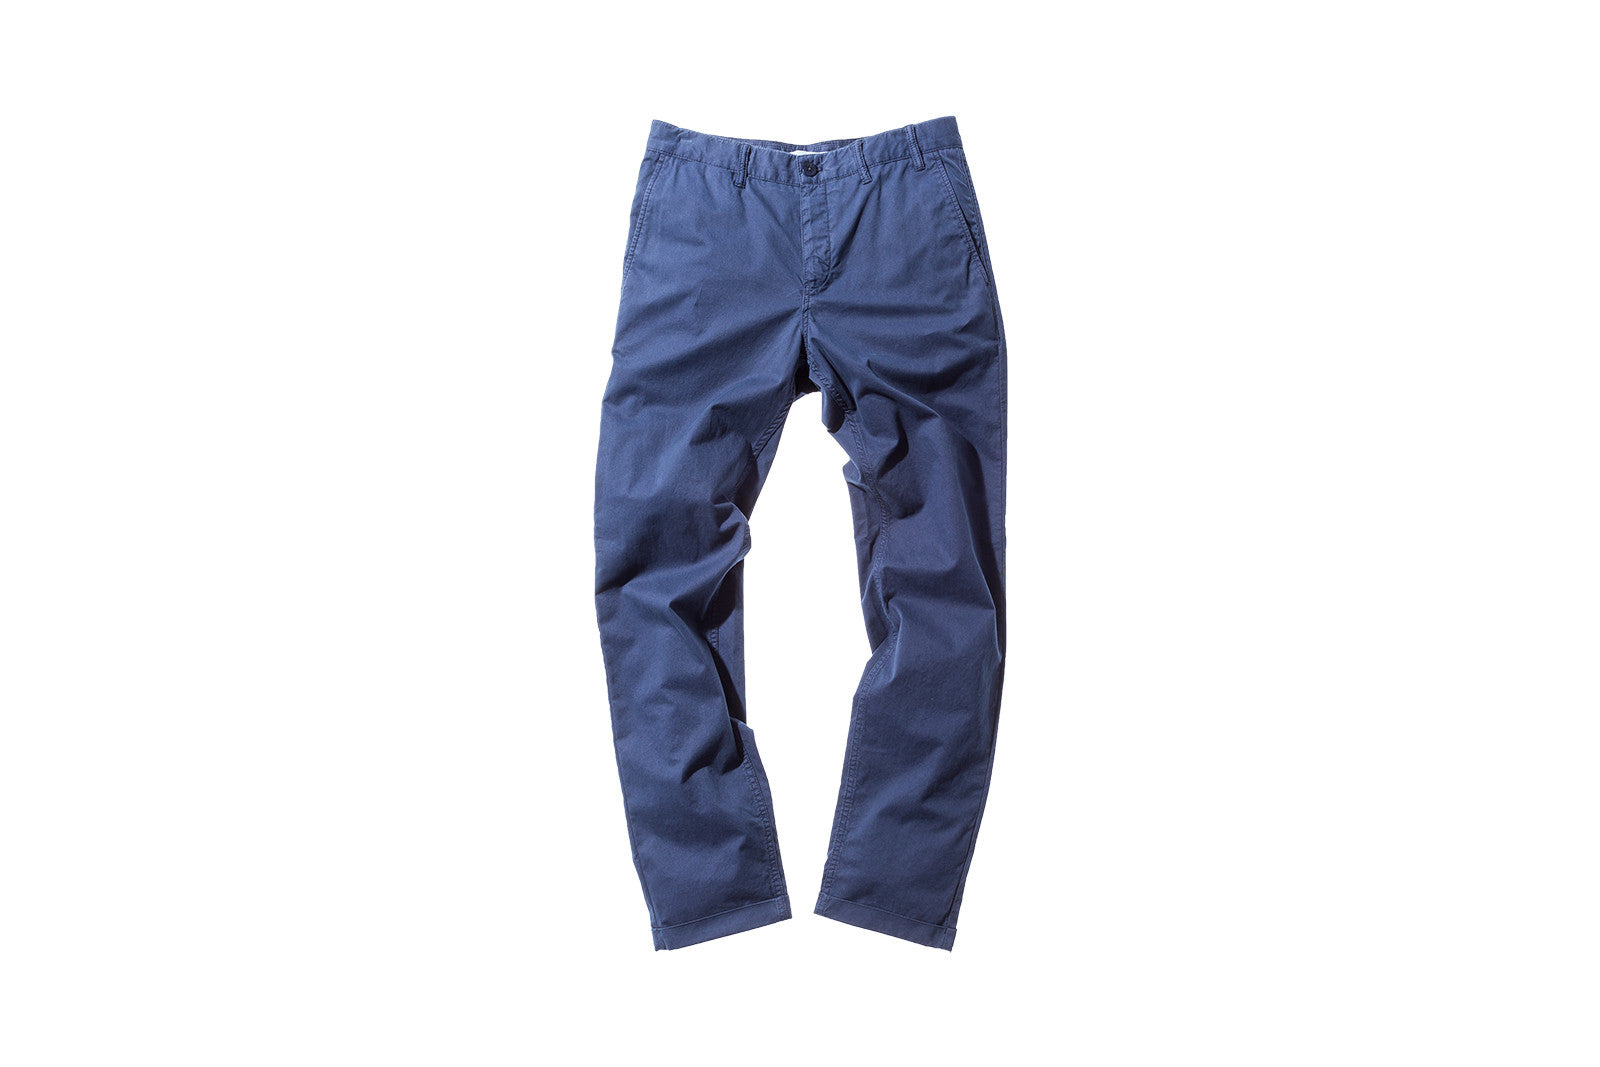 Norse Projects Aros Light Twill Pant - Navy